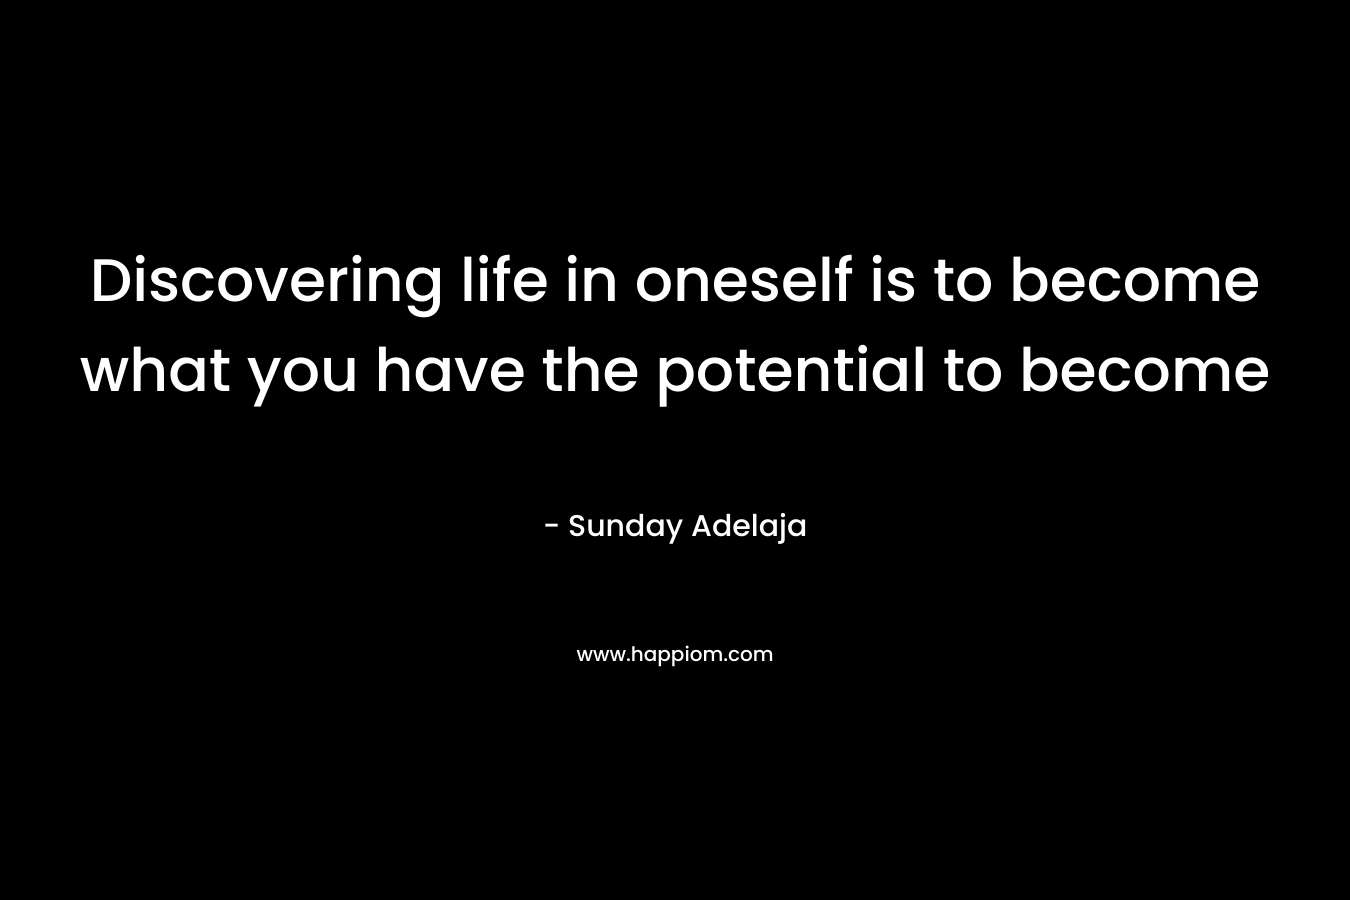 Discovering life in oneself is to become what you have the potential to become